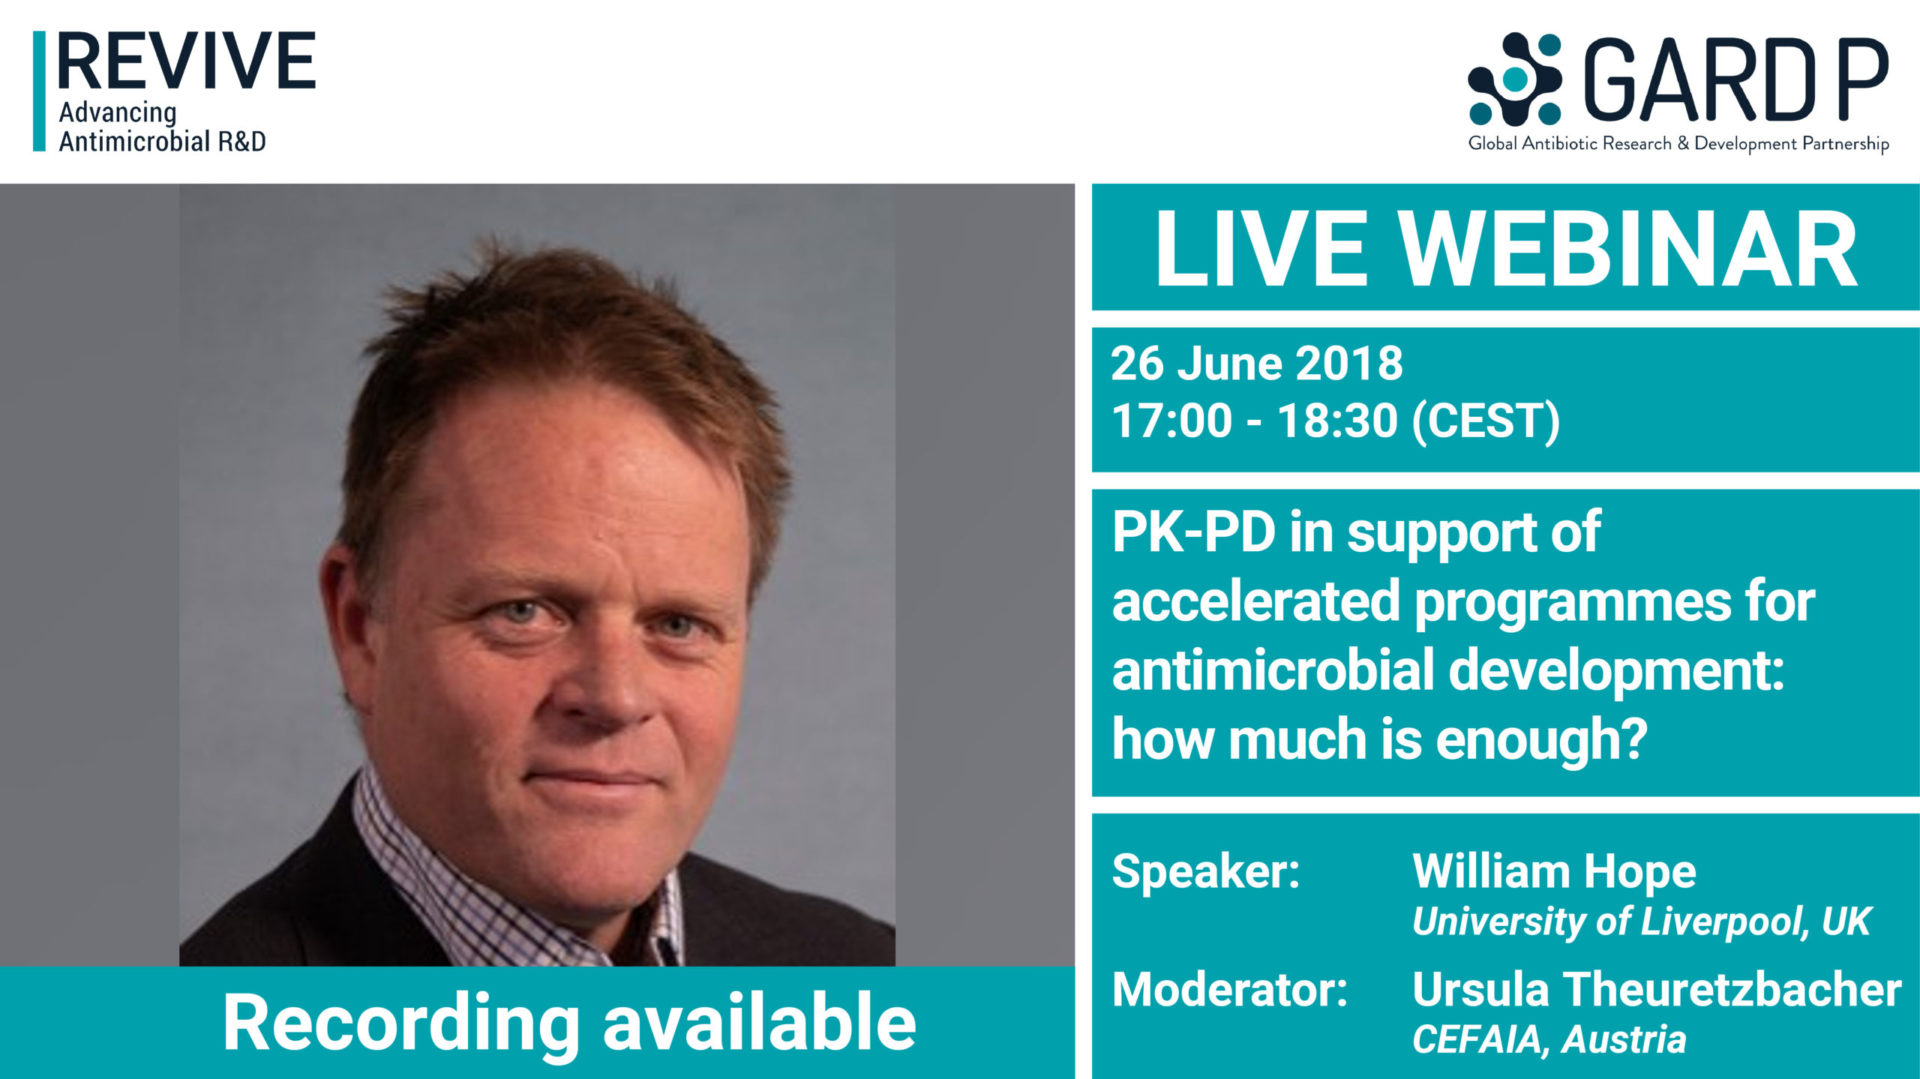 PK-PD in support of accelerated programmes for antimicrobial development: how much is enough?